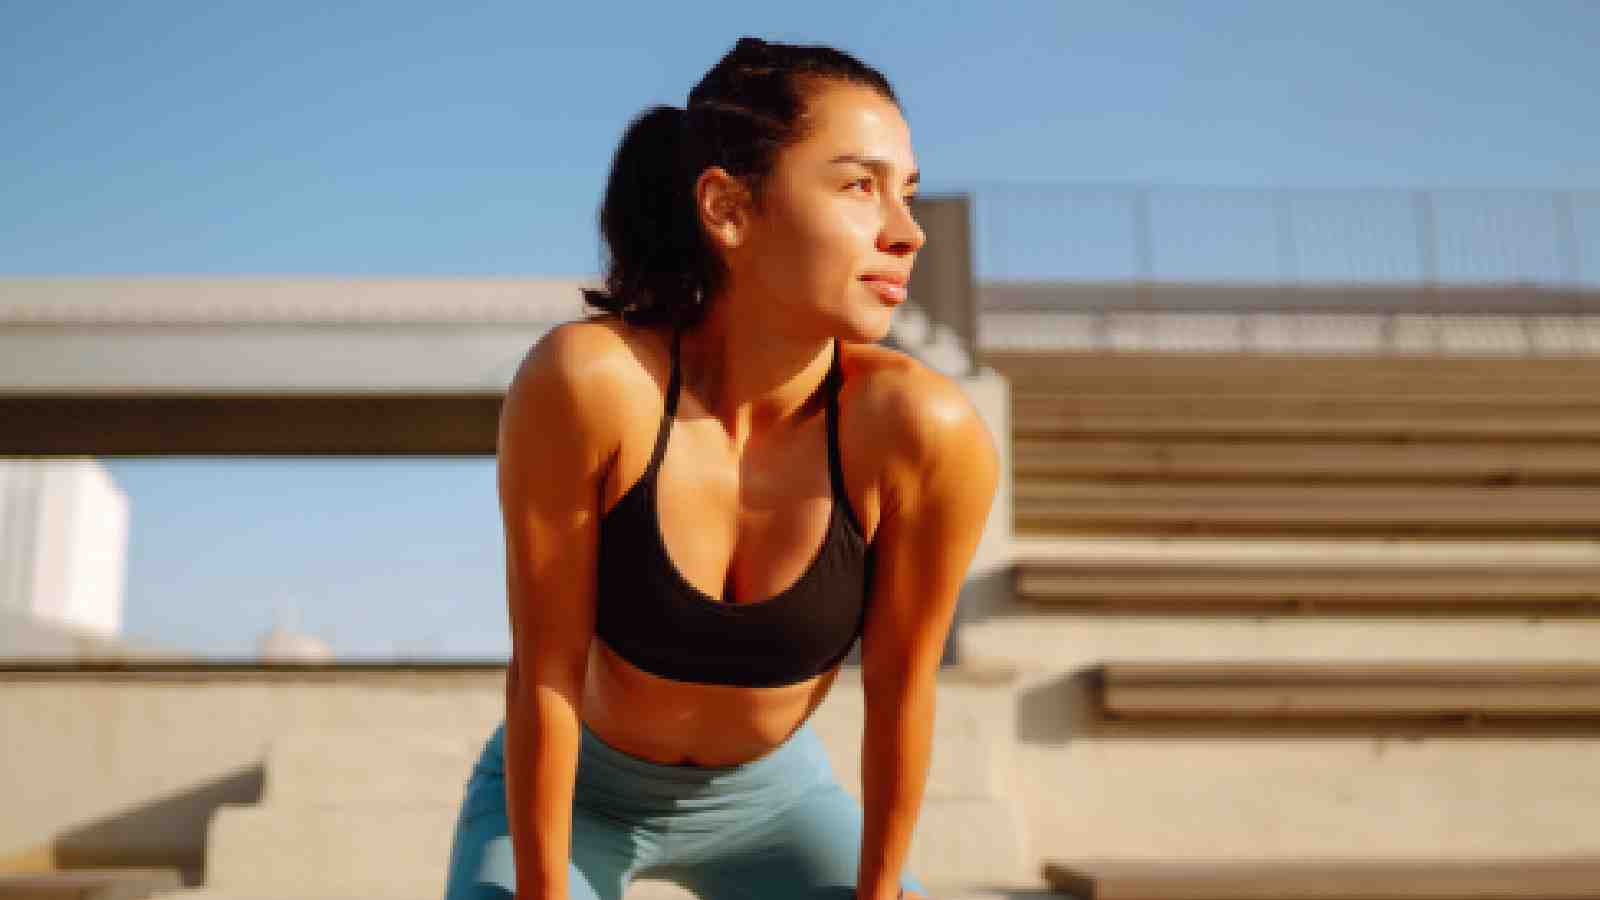 Heatwave: Easy tips to cool down after working out in summer heat